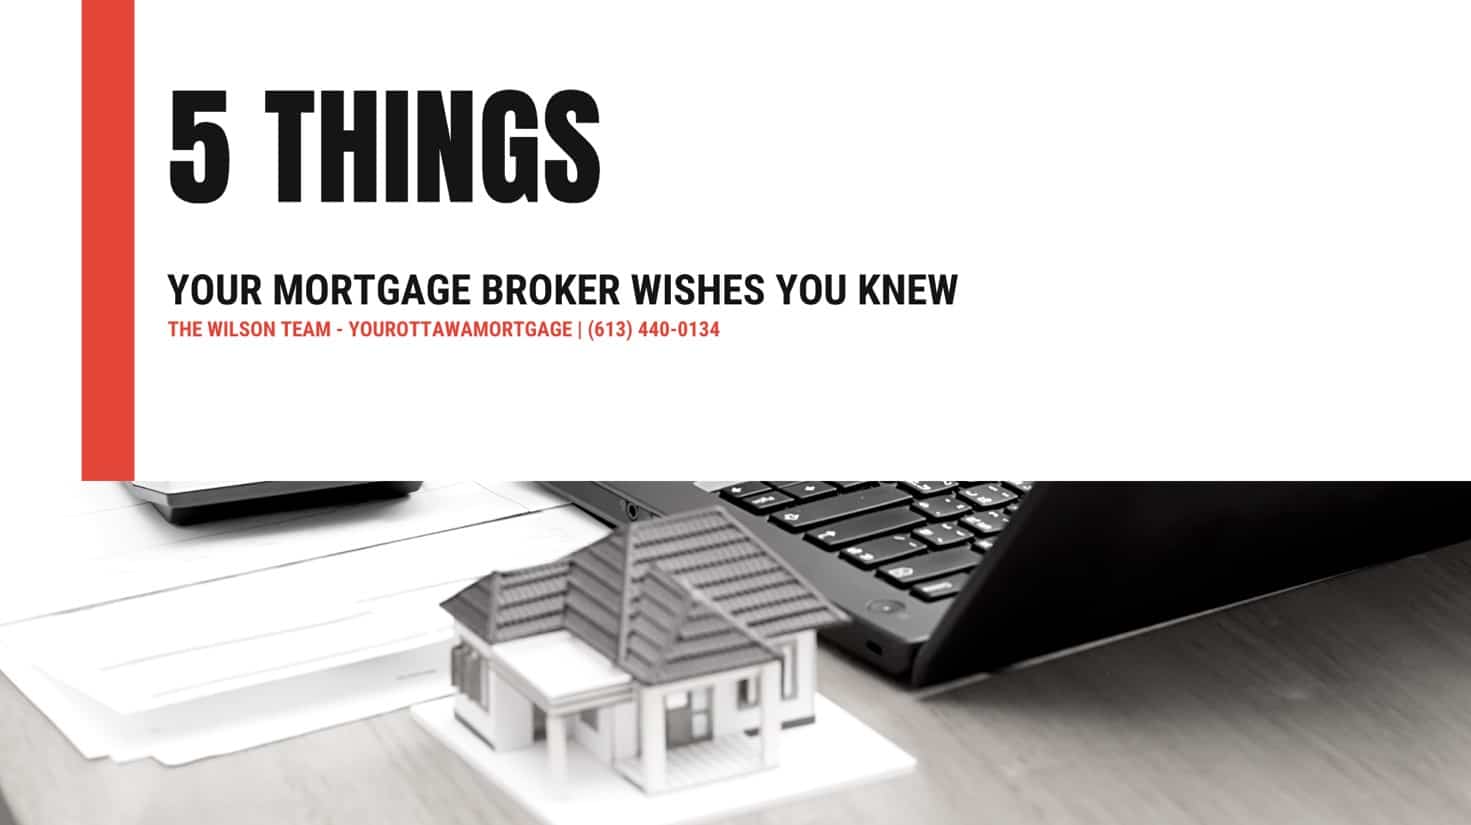 Ottawa Mortgage Broker | 5 Things Your Broker Wishes You Knew